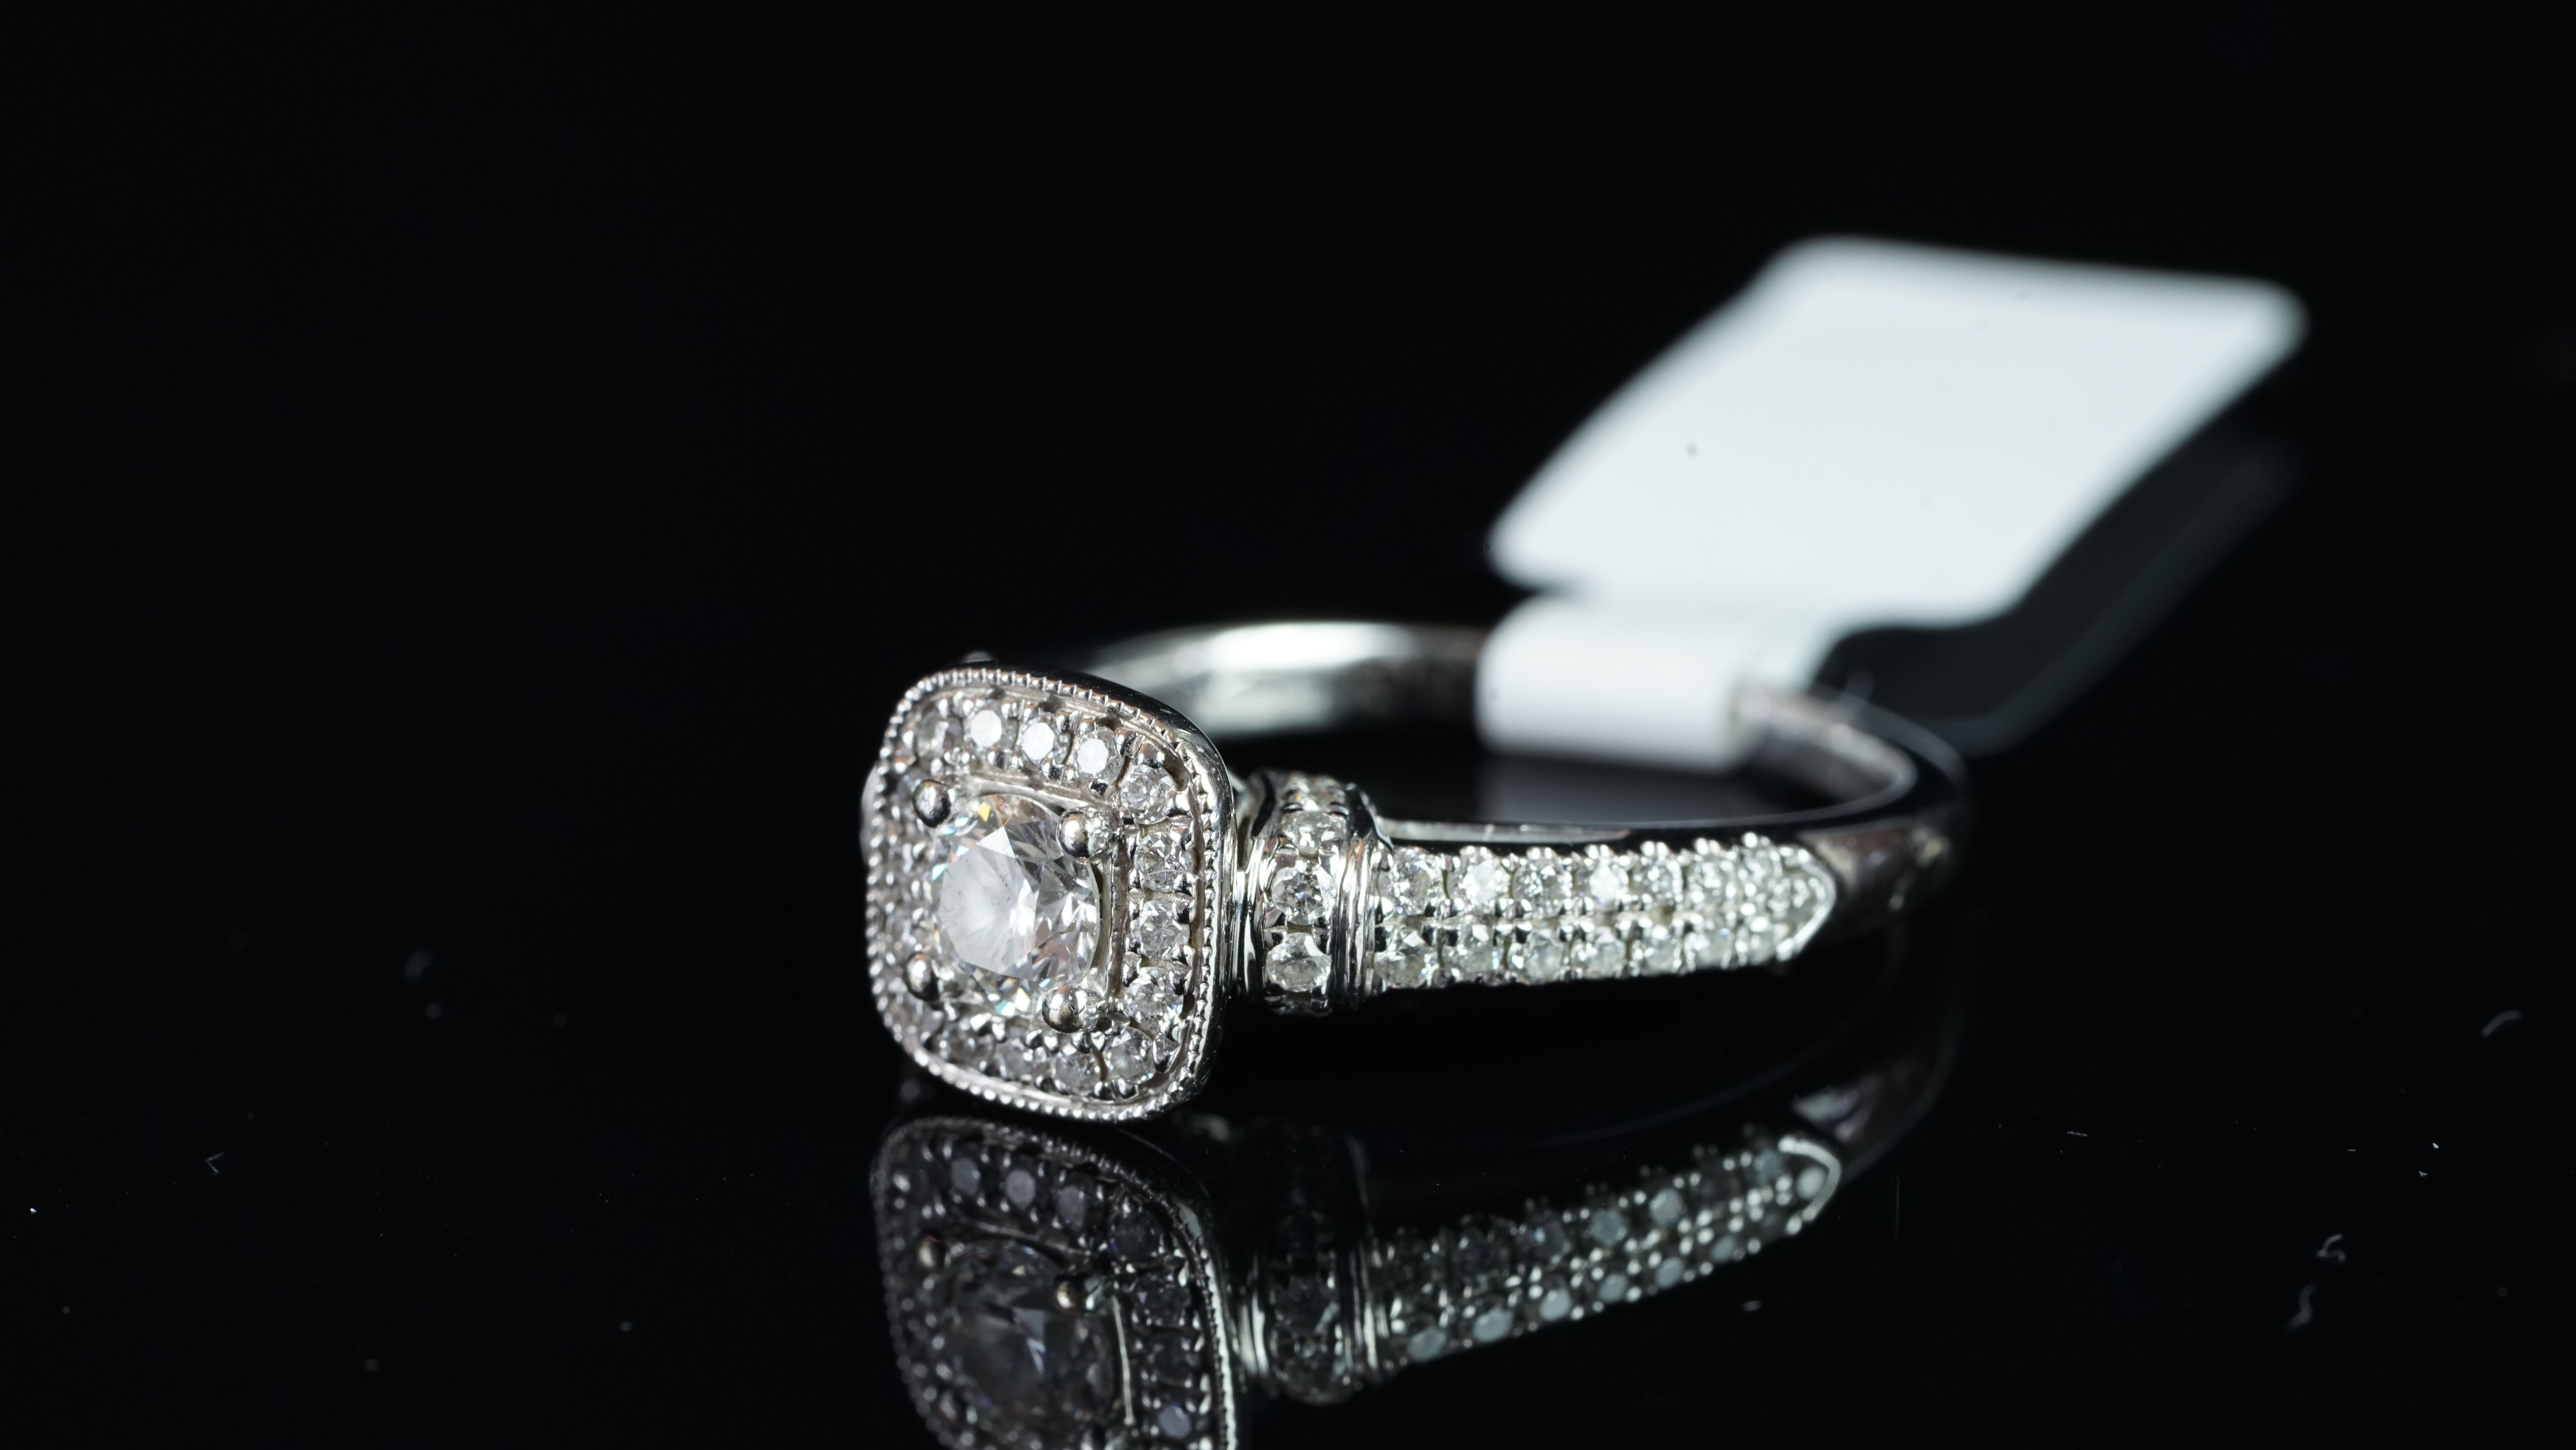 A diamond cluster ring by Vera Wang, from the 'Love' collection, set with round brilliant cut - Image 3 of 3